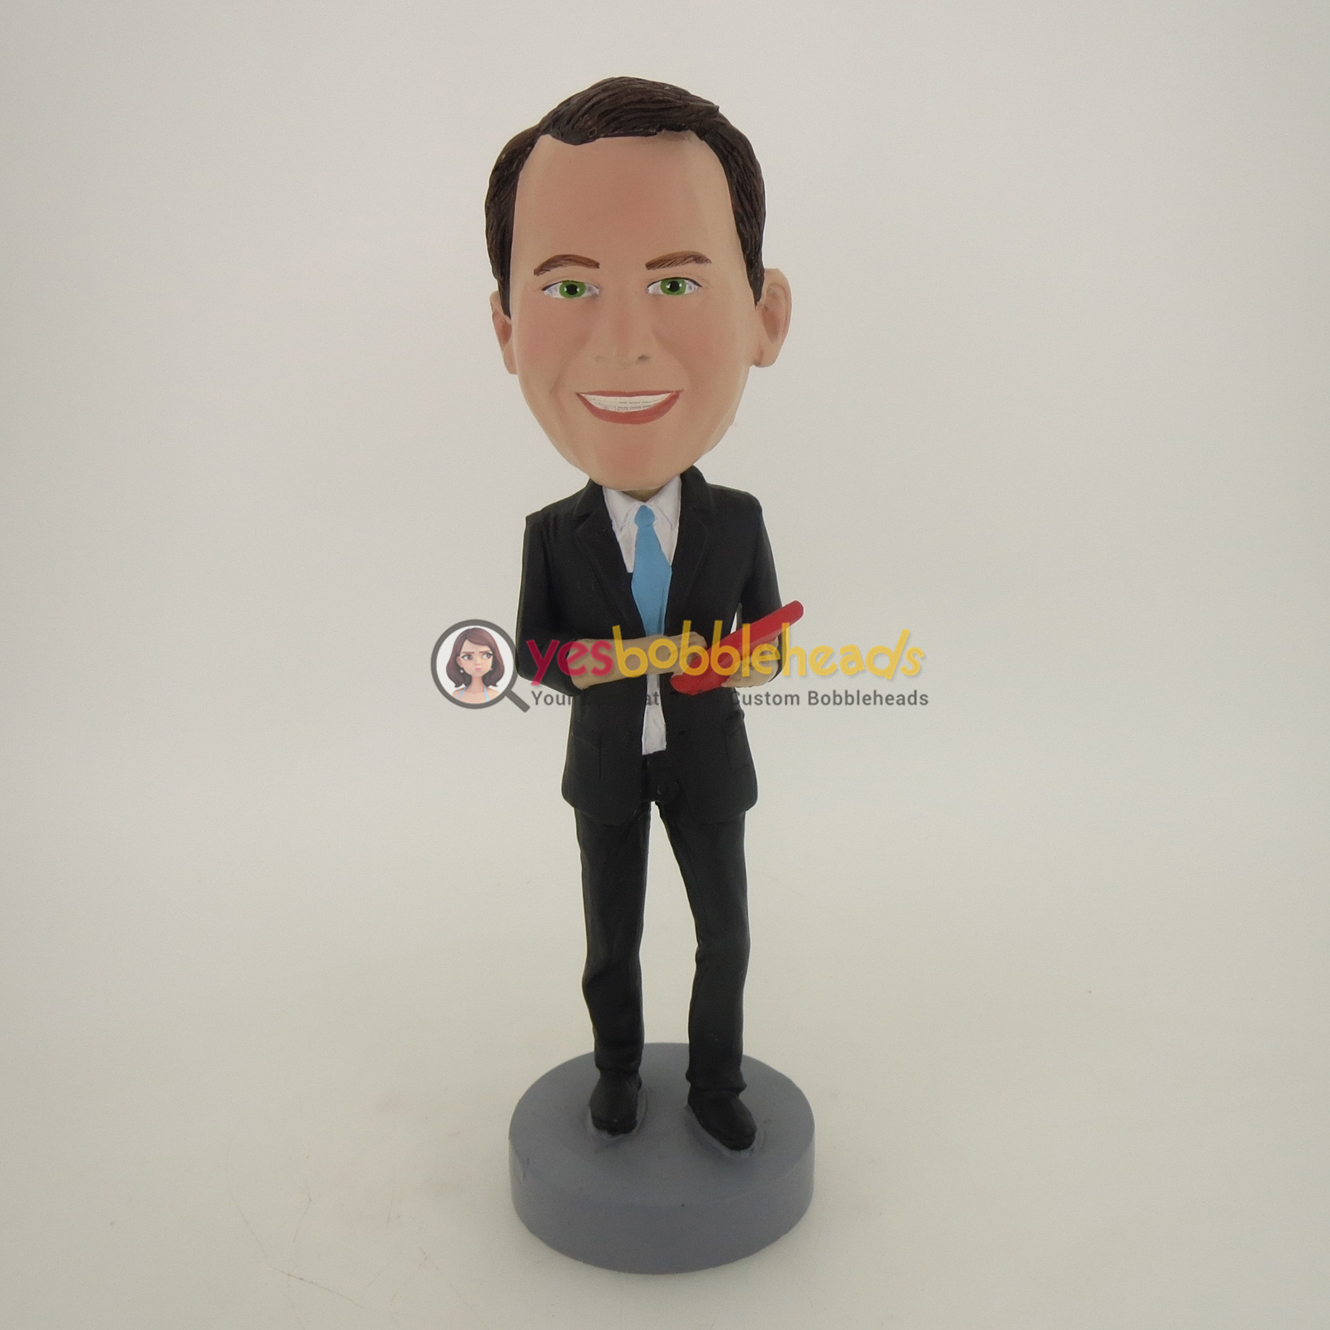 Picture of Custom Bobblehead Doll: Business Man Holding Calculator